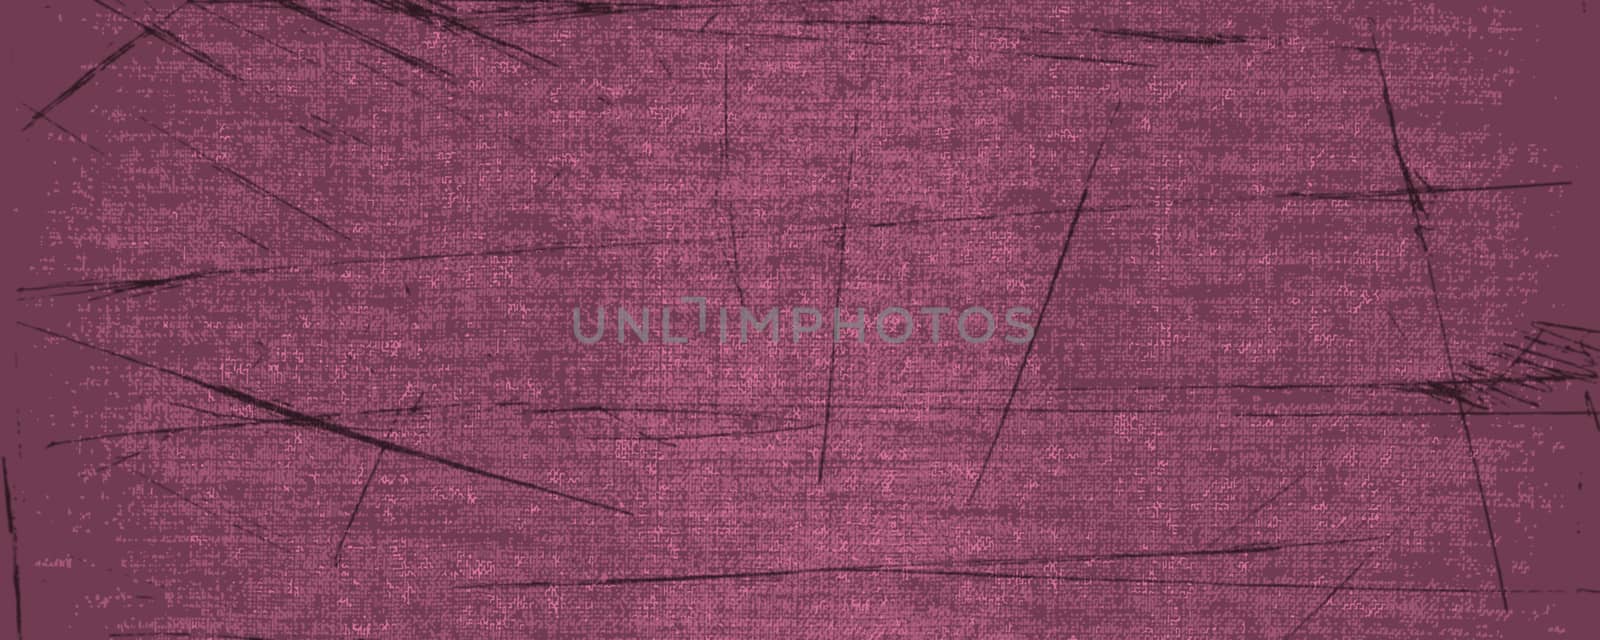 Dark burgundy abstract illustration which can be used as a background